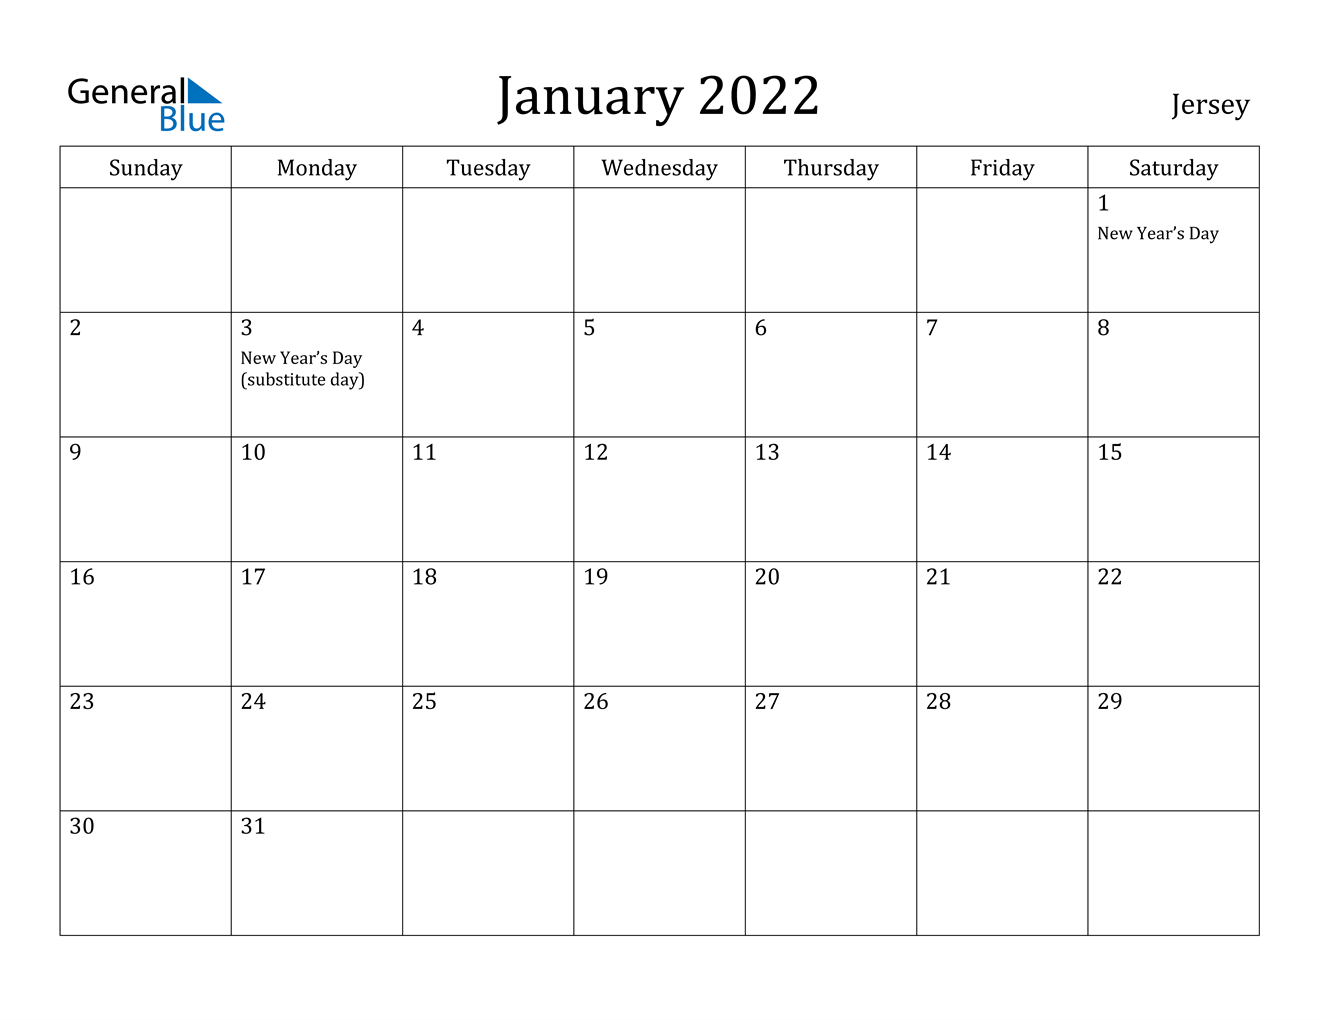 January 2022 Calendar - Jersey  Calendar Pages For 2022 To Print